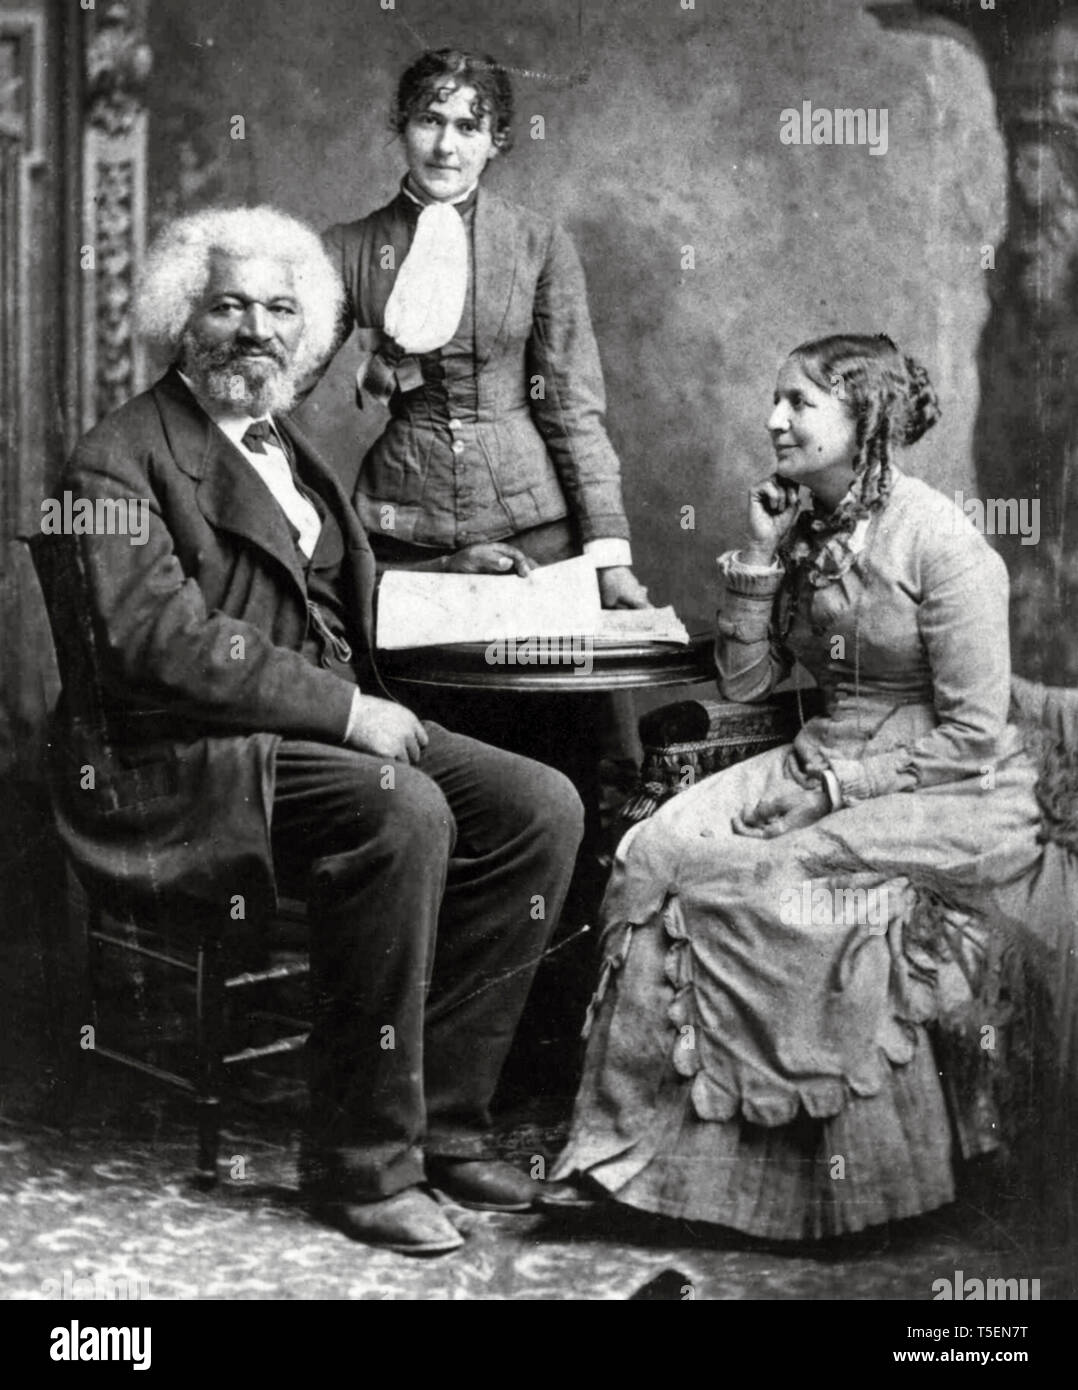 Frederick Douglass (1818-1895), portrait with his second wife Helen Pitts and her sister Eva, unknown date Stock Photo